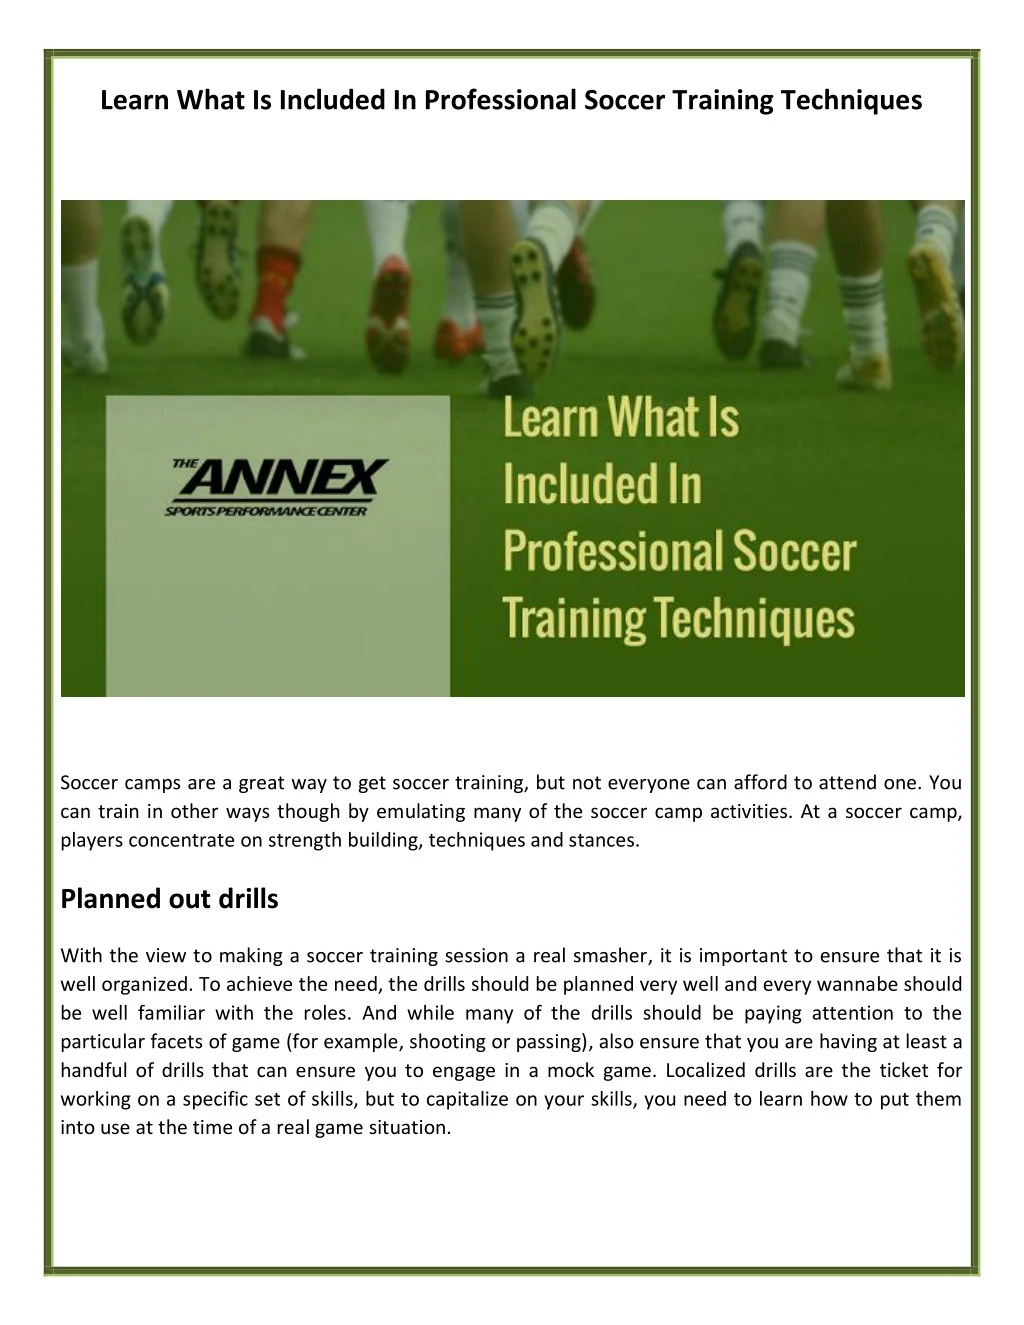 learn what is included in professional soccer